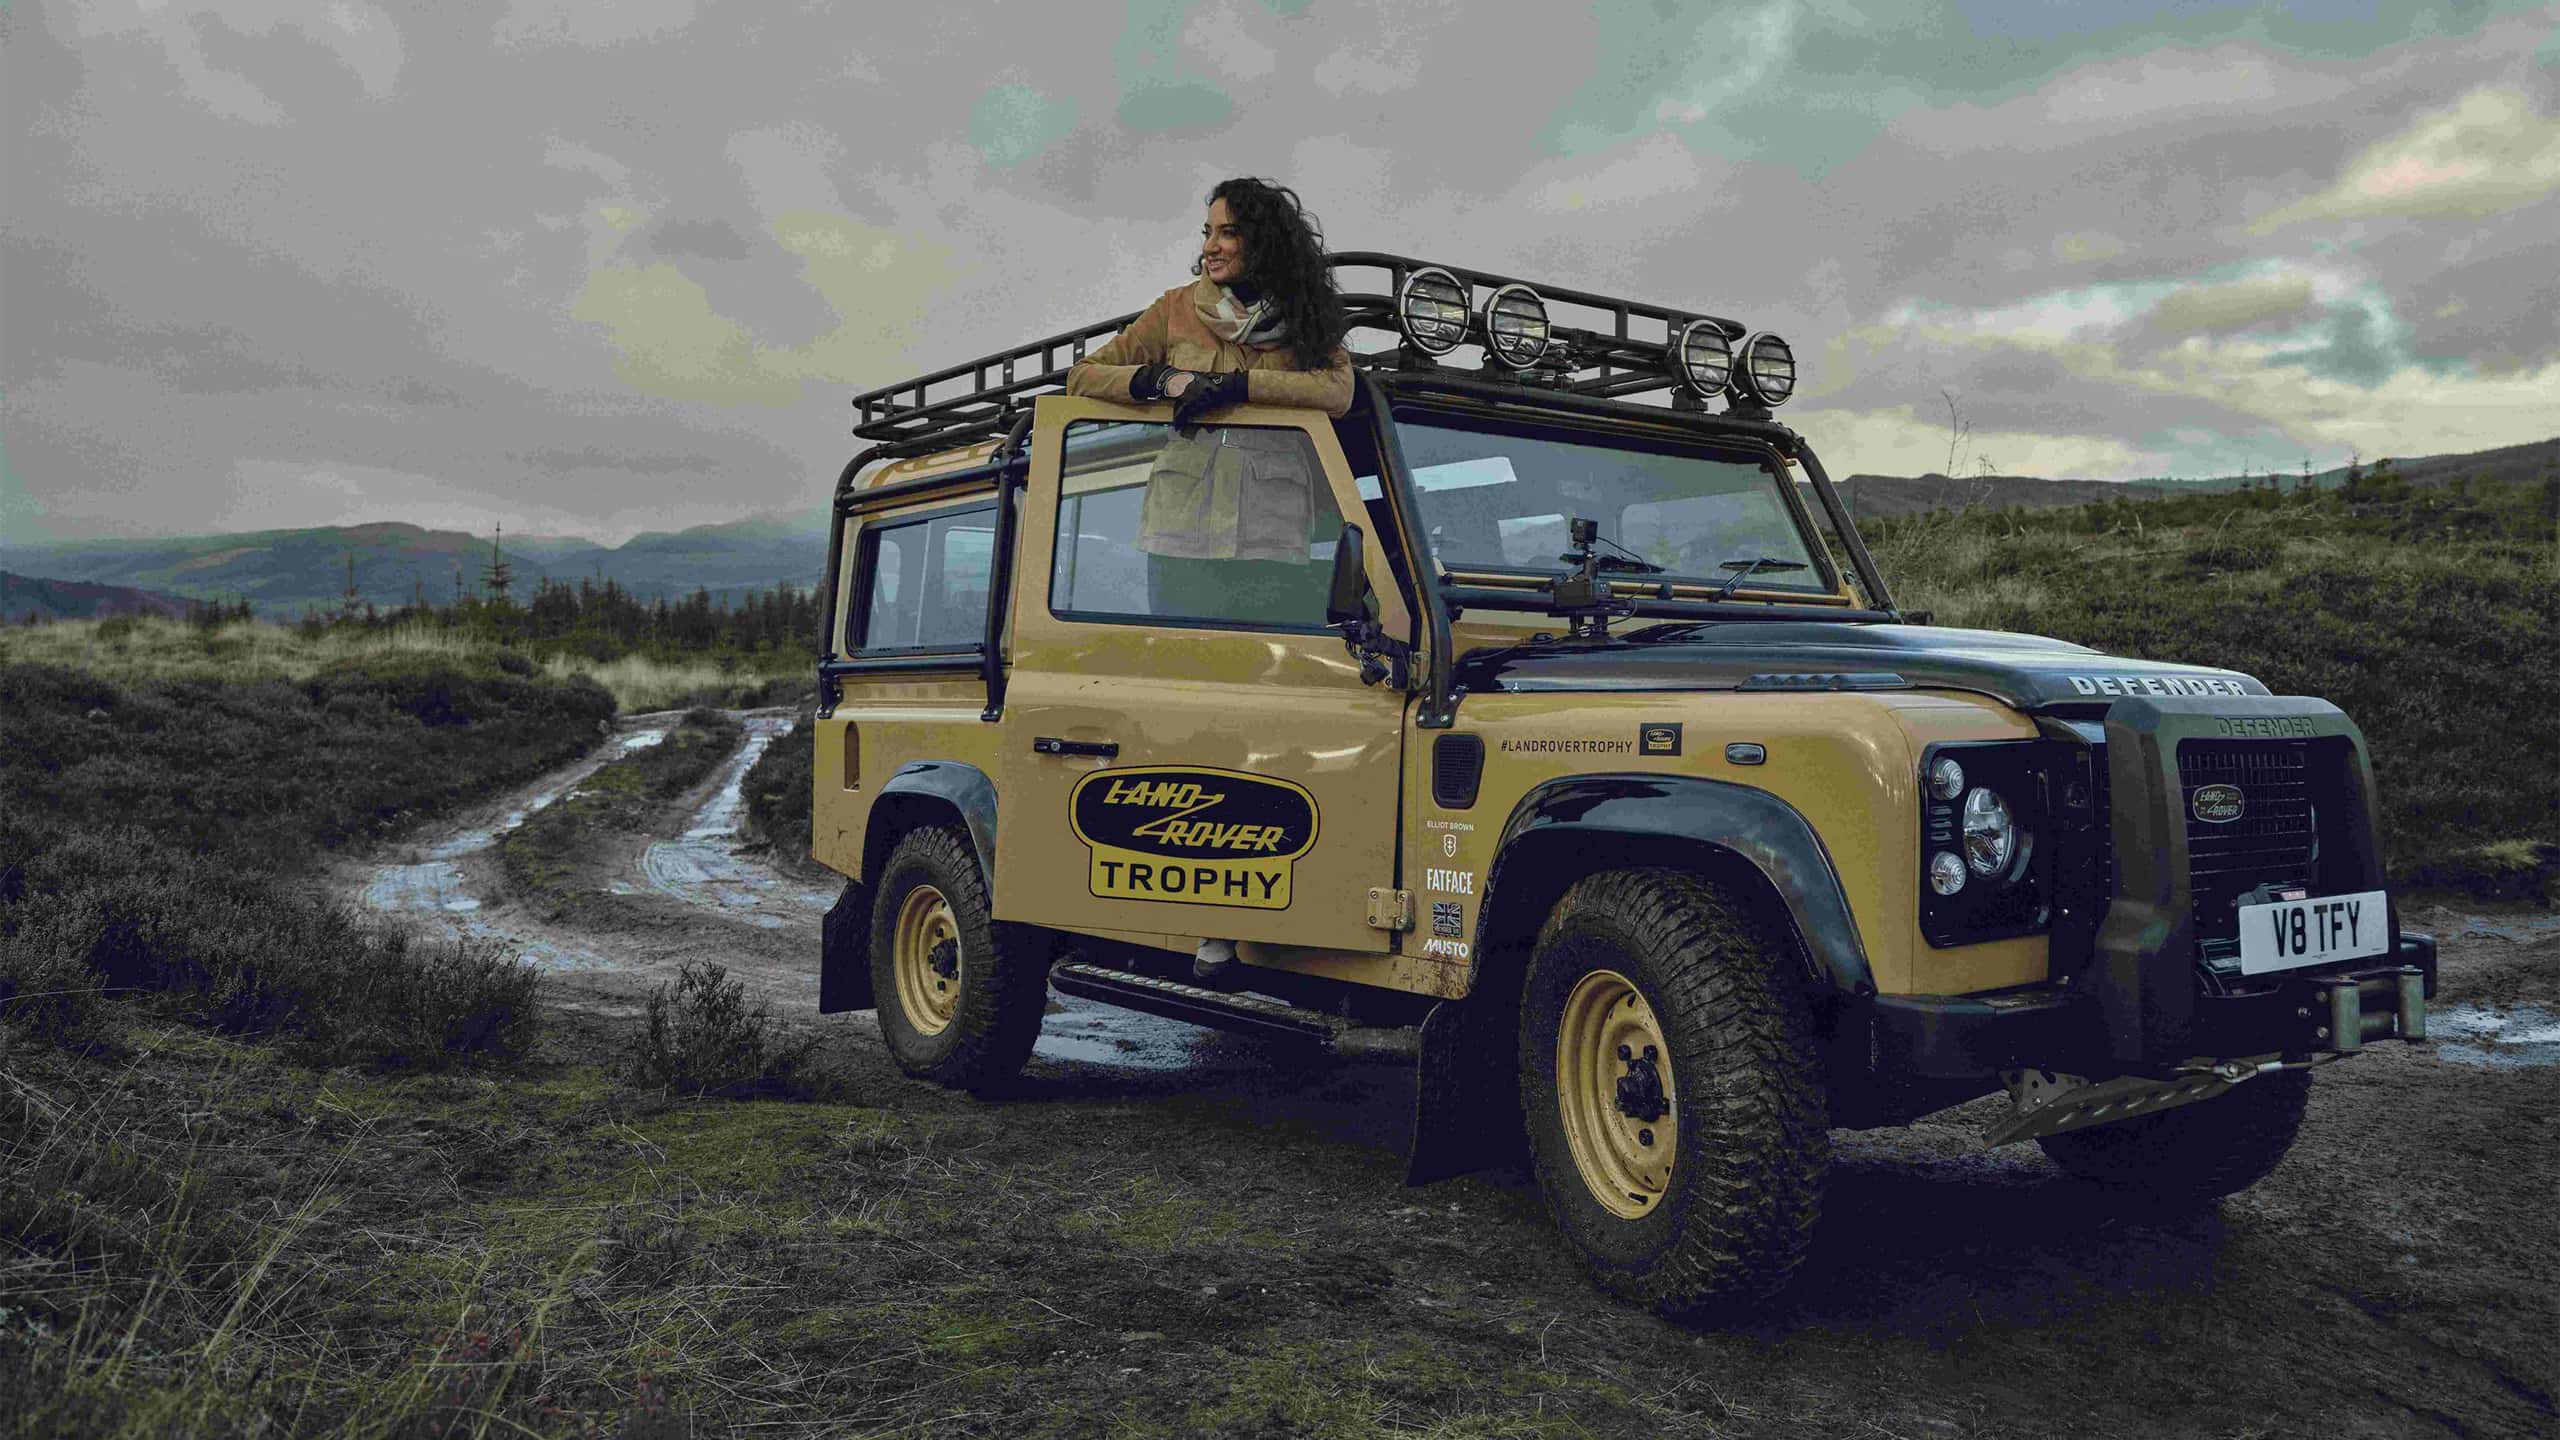 A girl is standing on the defender